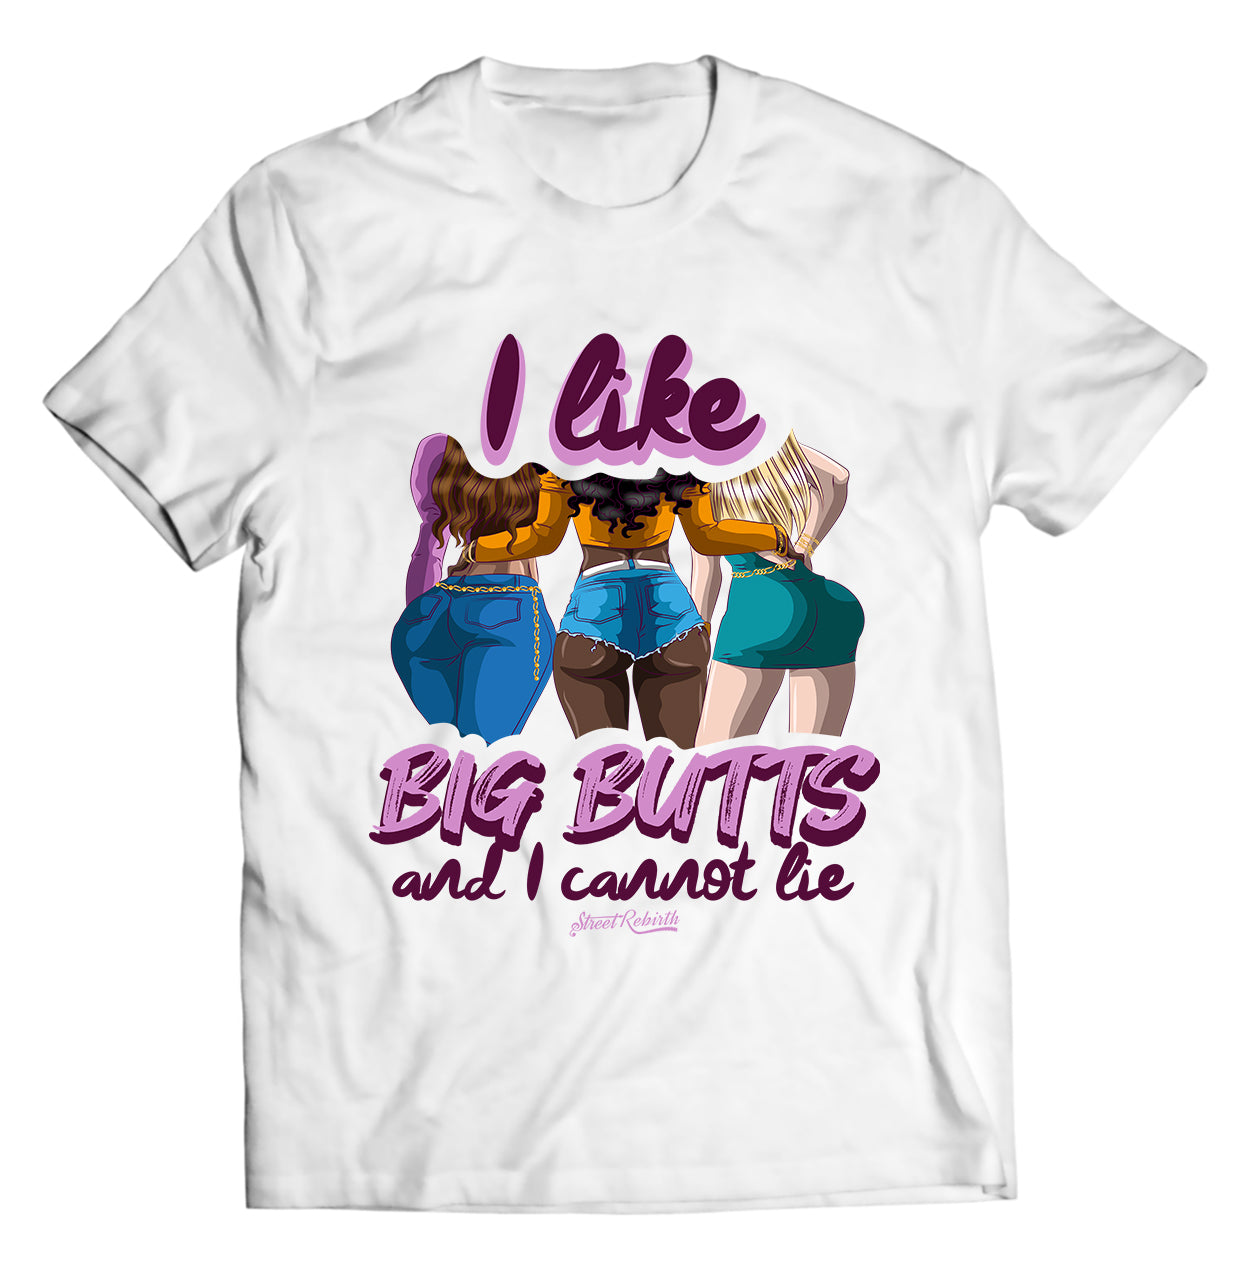 I Like Big Butts Shirt - Direct To Garment Quality Print - Unisex Shirt - Gift For Him or Her